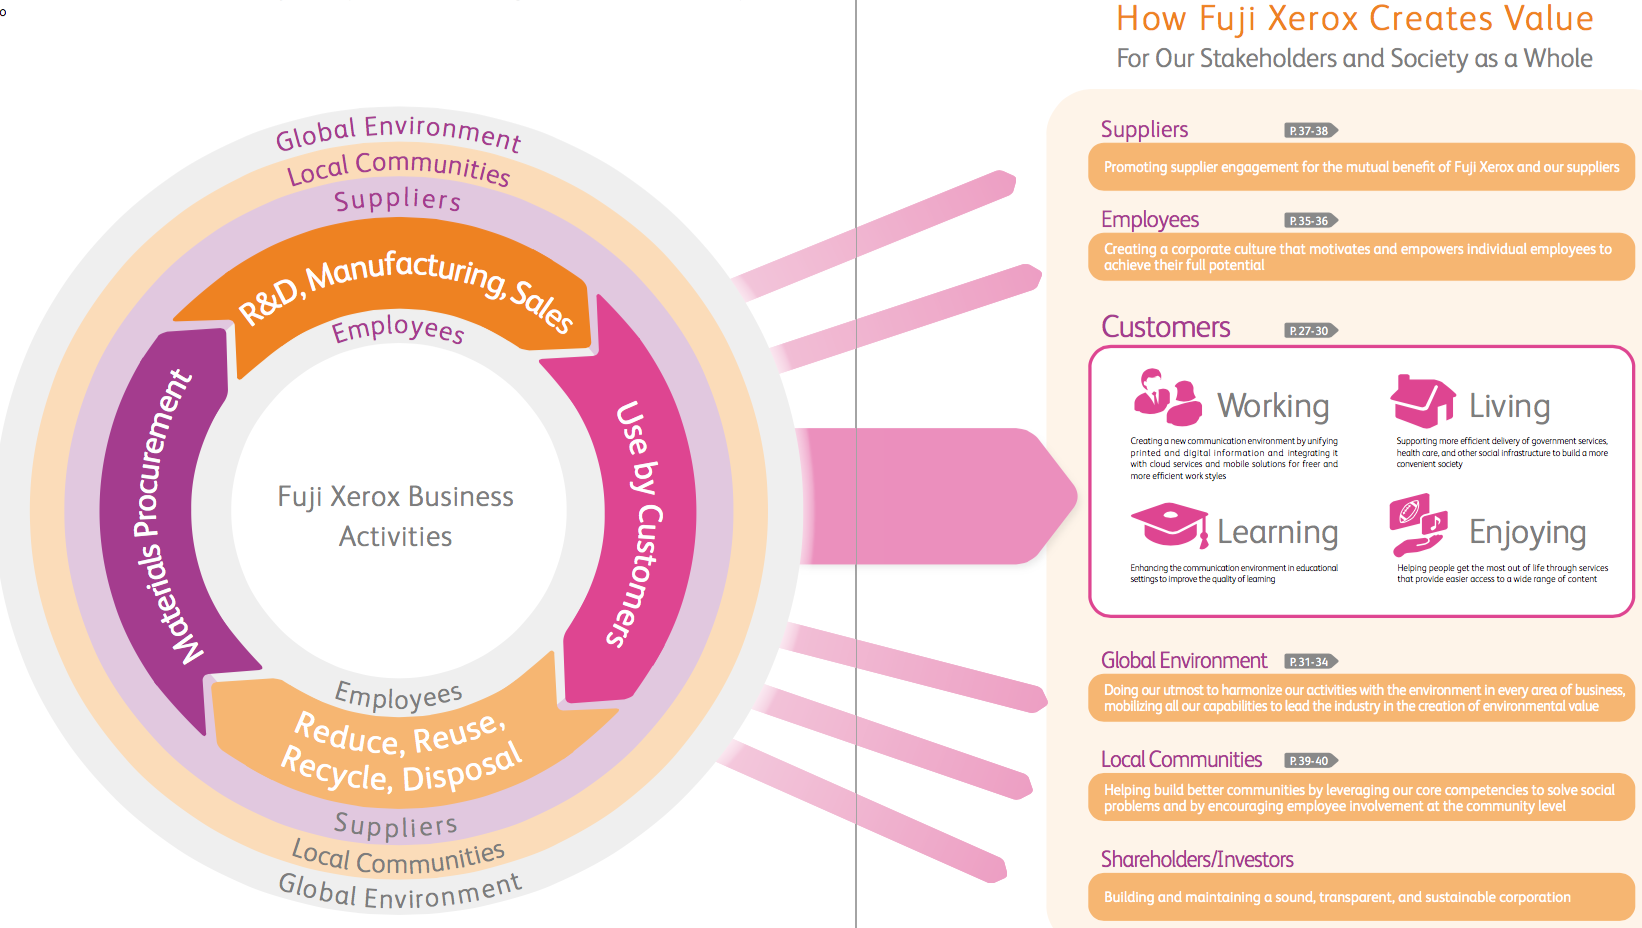 Figure 1. Business Activities and Value Creation